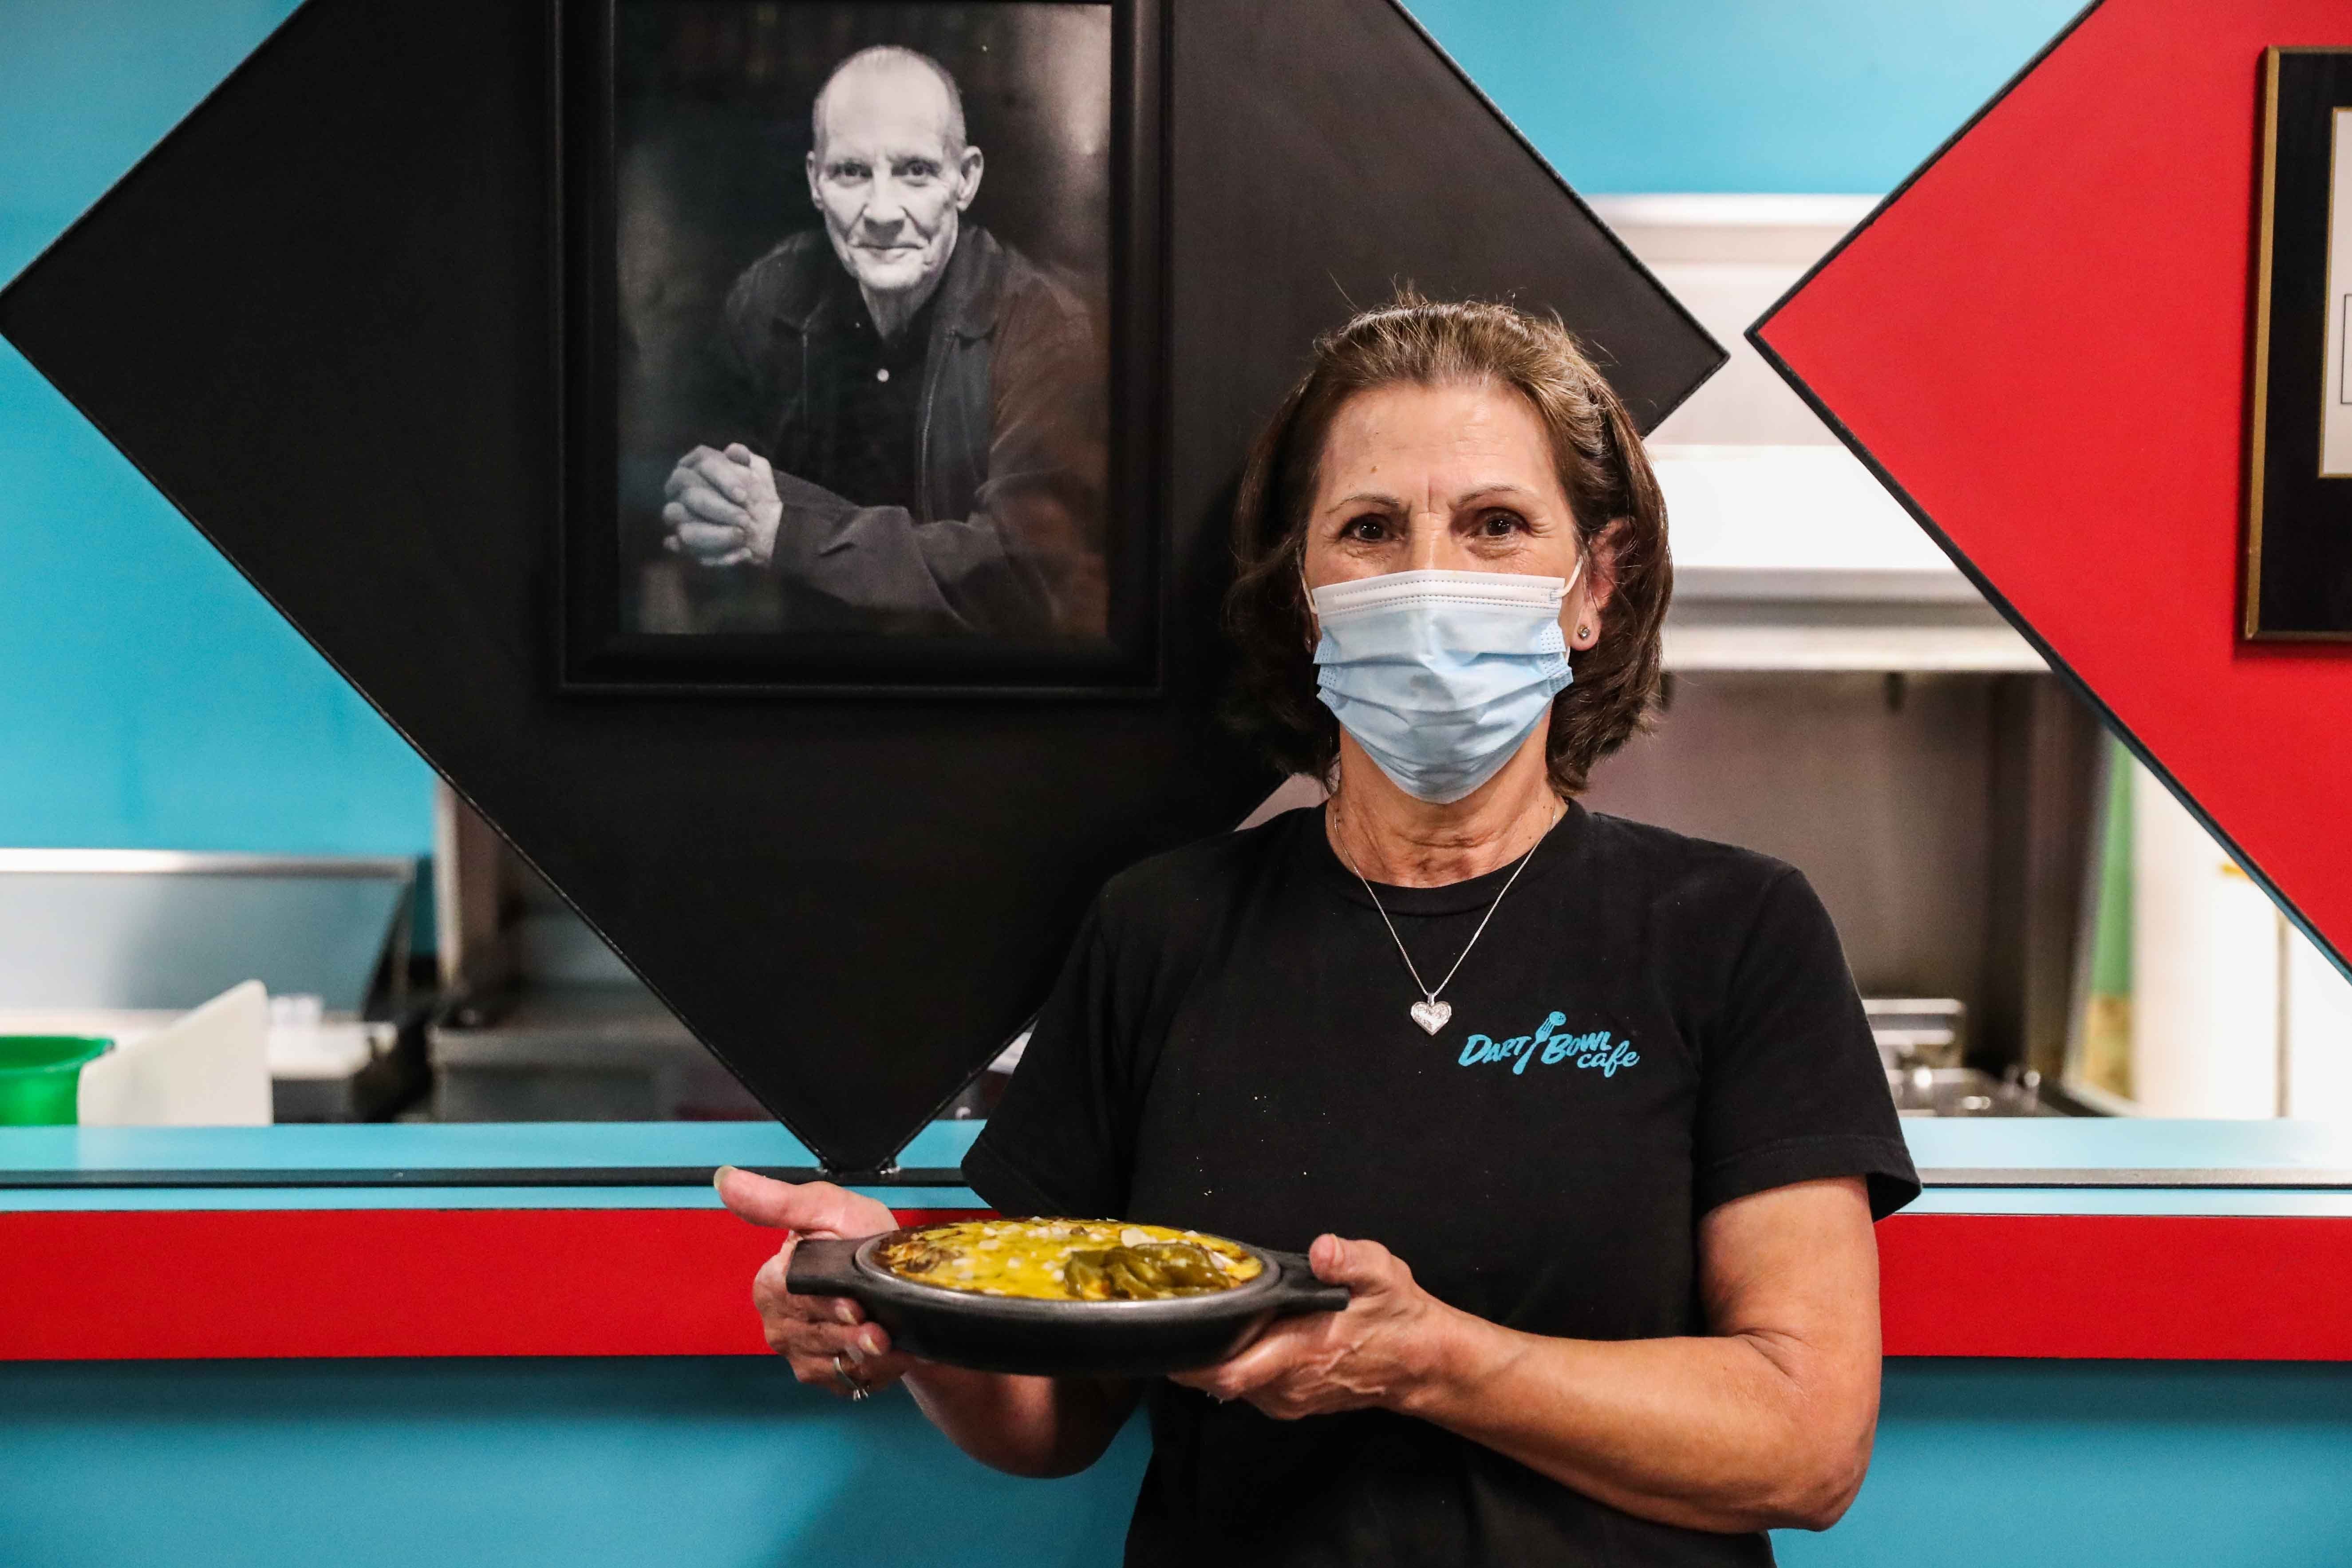 Peggy Zamarripa poses next to a photo of Dart Bowl Cafe founder Butch Martinets as she holds her famous enchiladas.